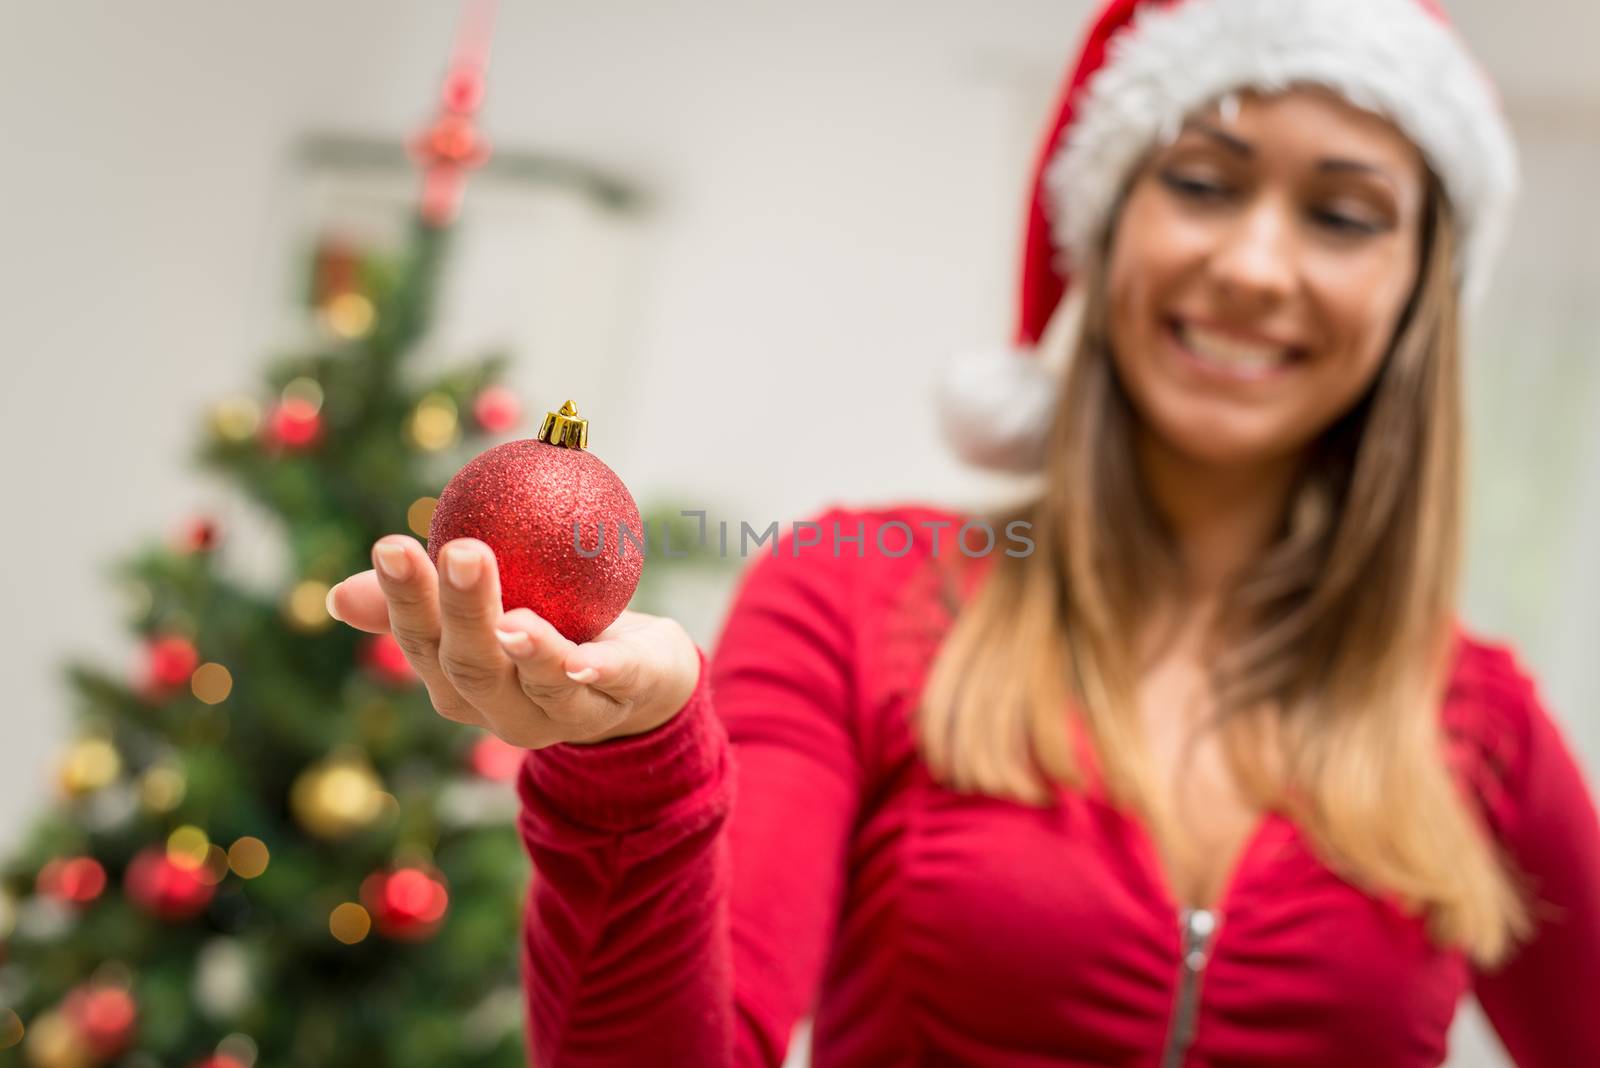 Close-up of a happy beautiful young woman holding red Christmas ornament. Selective focus. Focus on ornament in foreground.